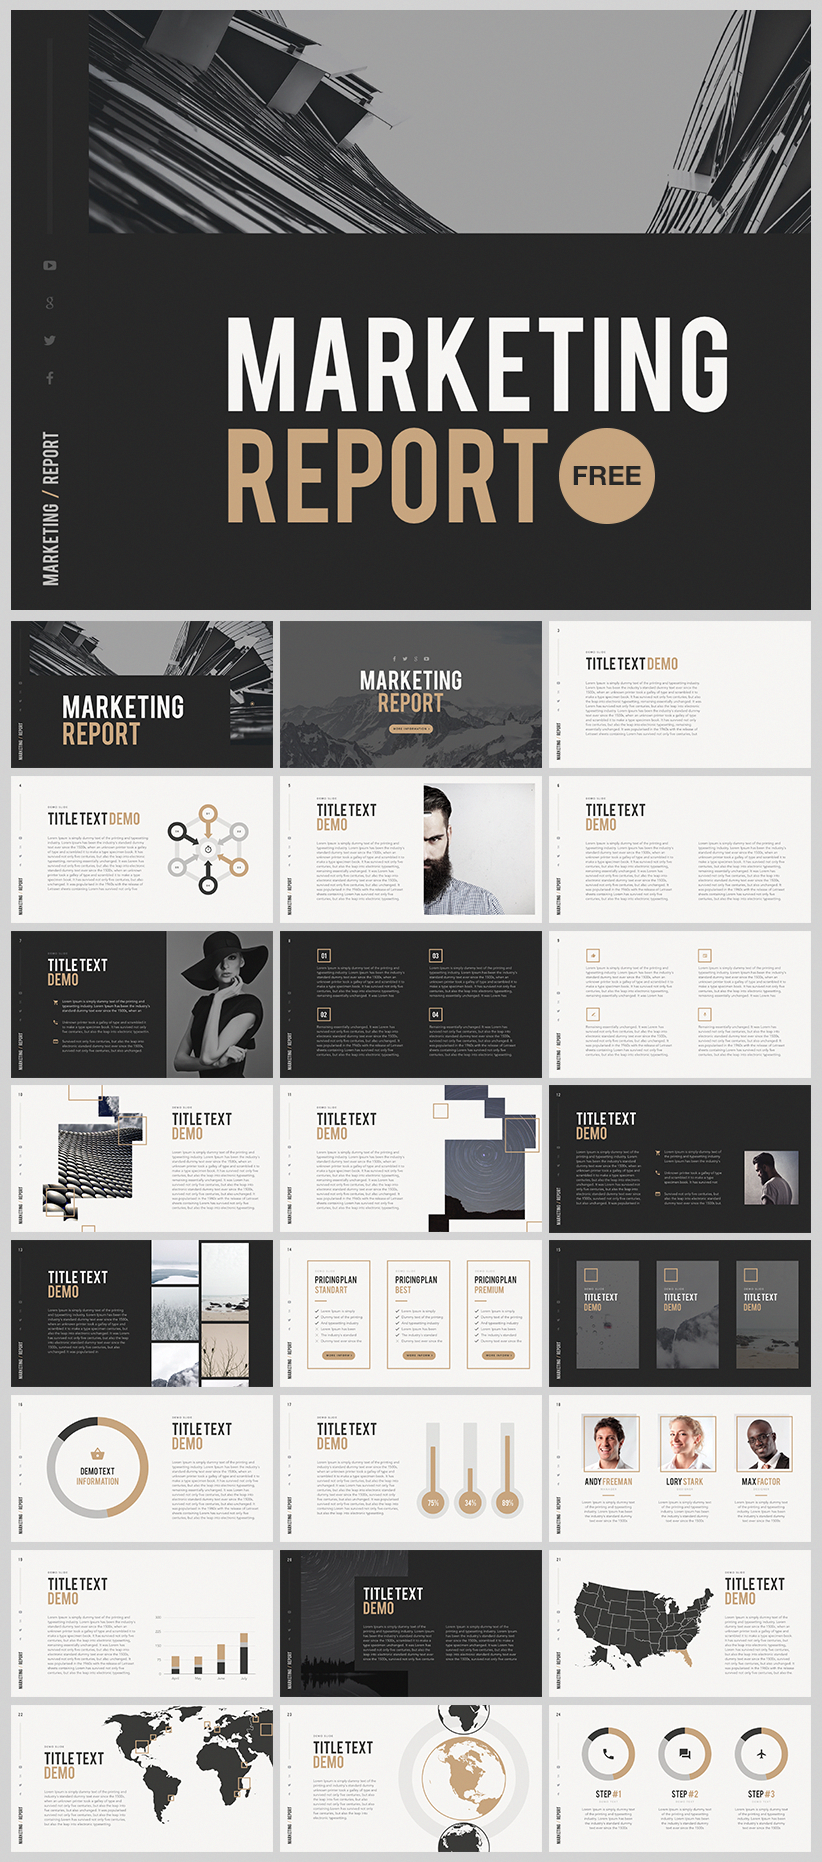 Marketing report presentation template on PowerPoint in grey and white theme